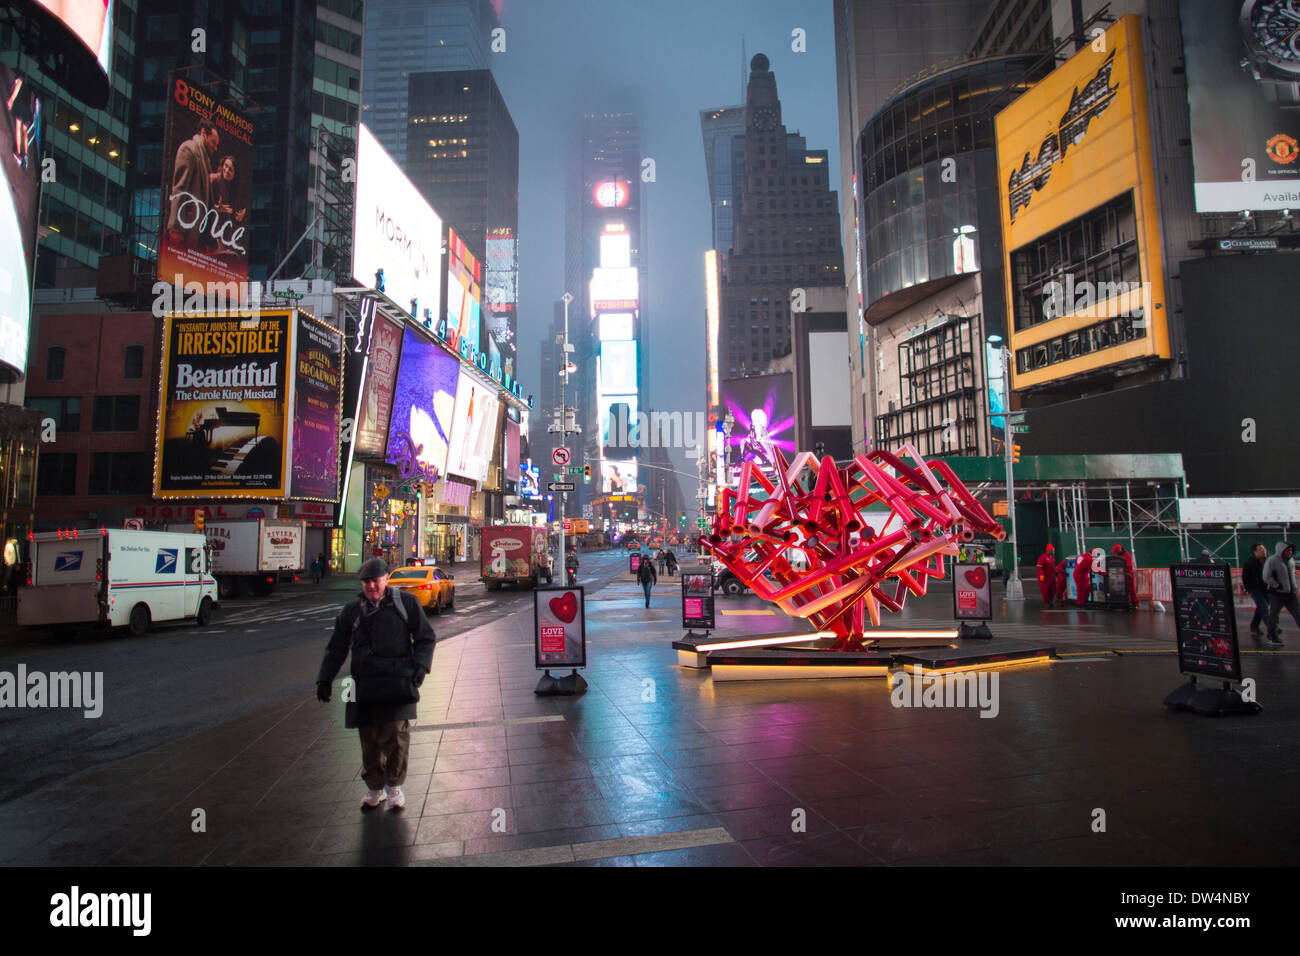 Manhattan New York city in North America, Pictured mist in Times Square Broadway theatre district early in the morning Stock Photo